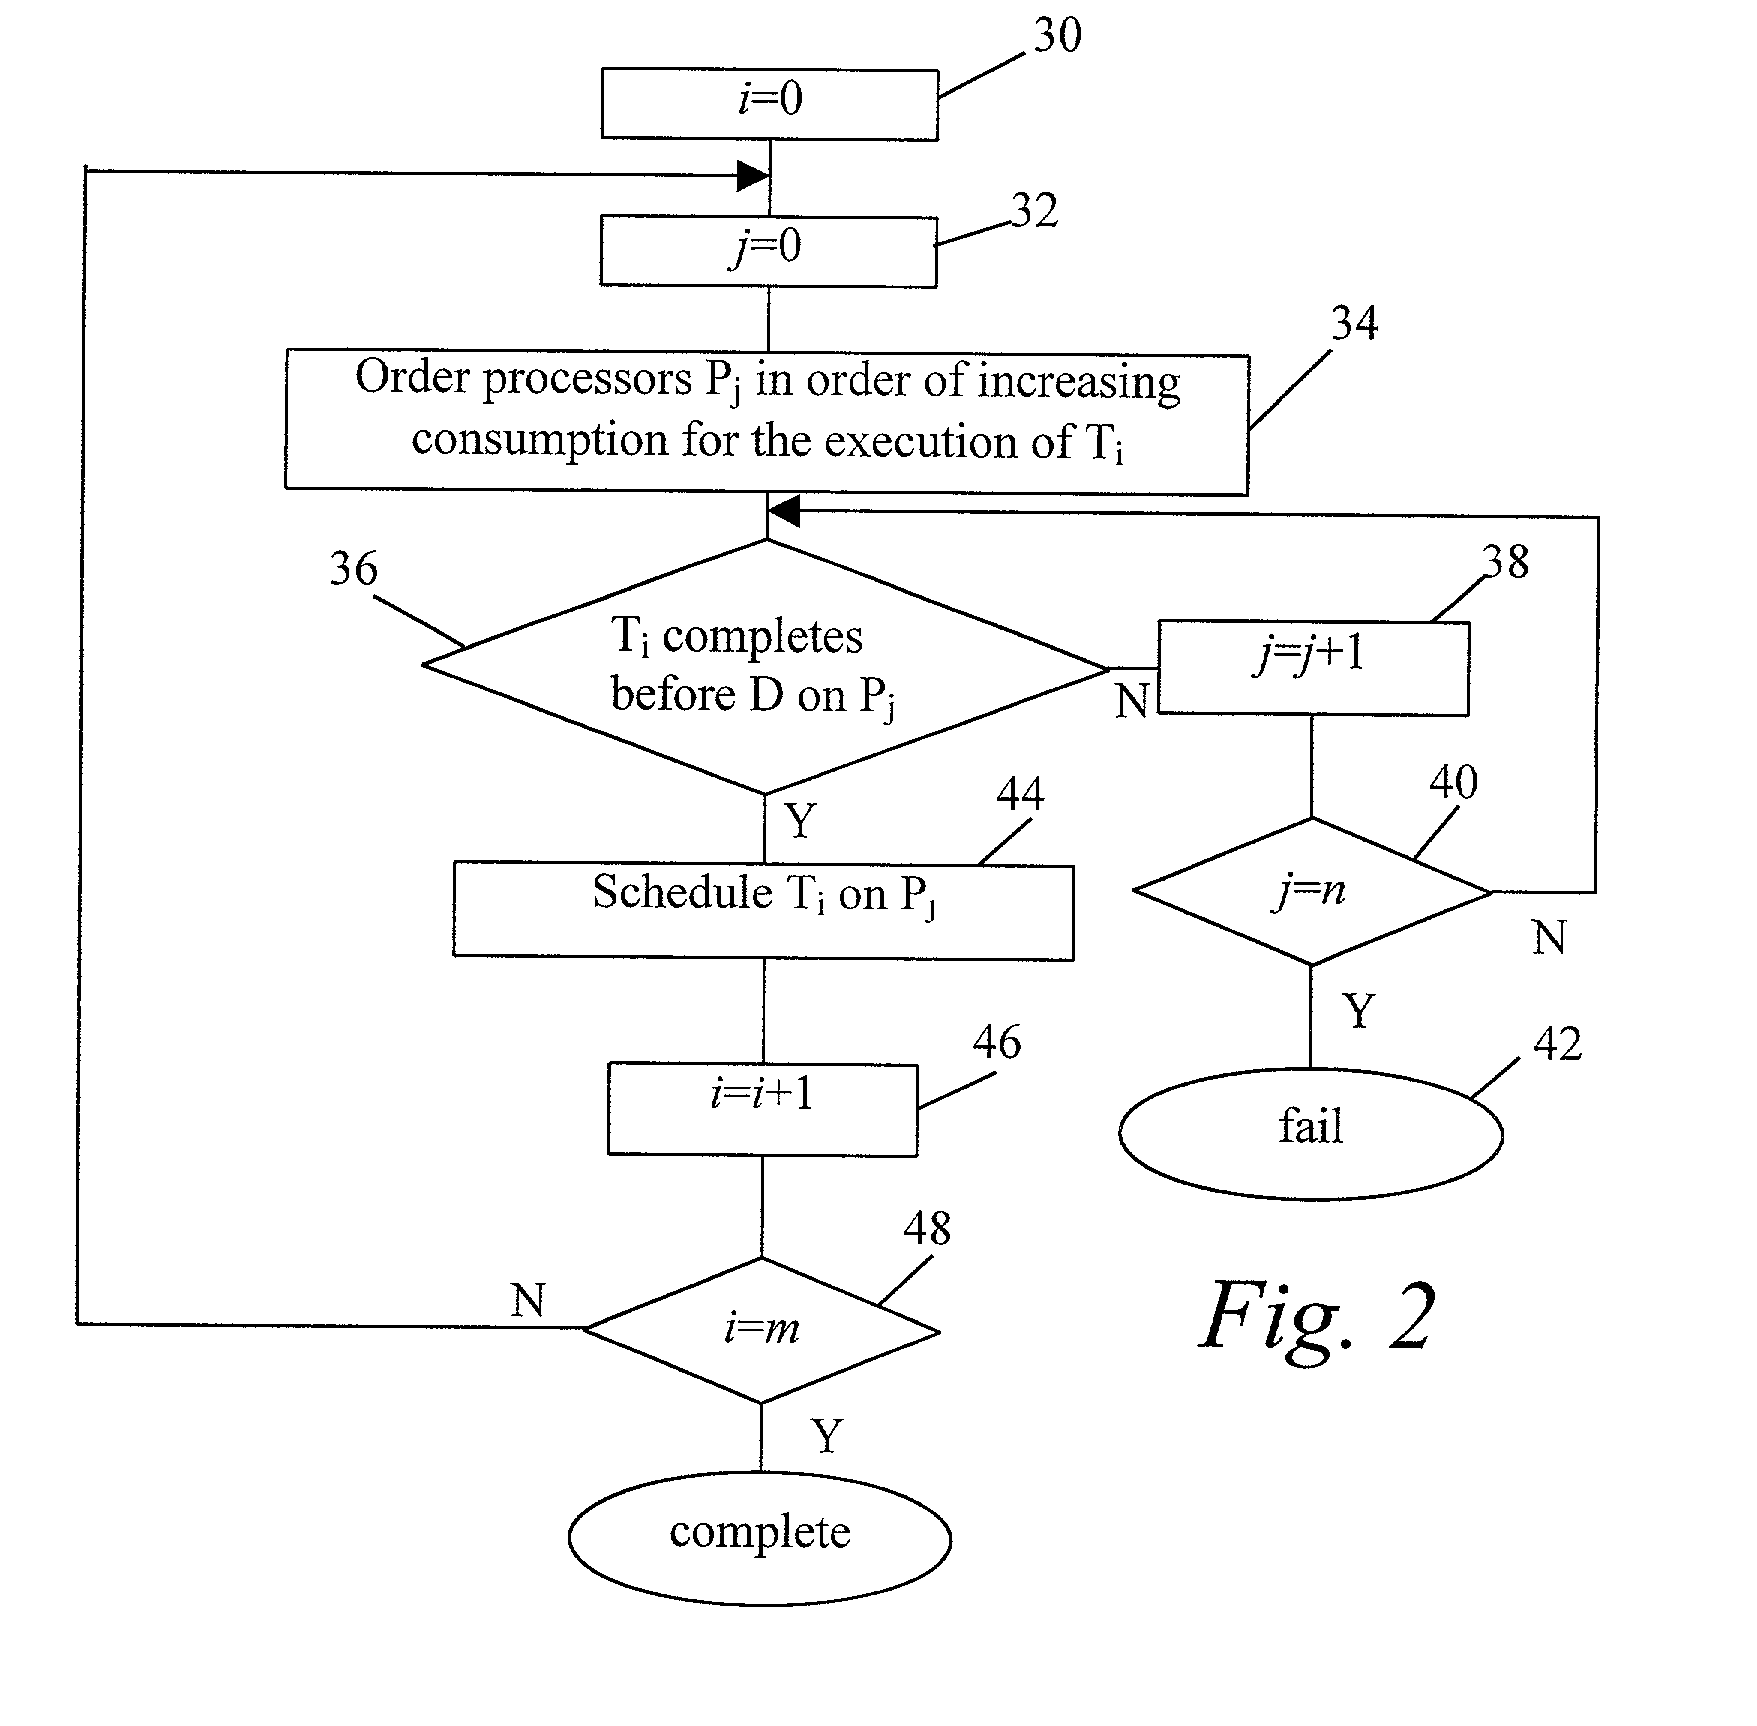 Energy-aware scheduling of application execution